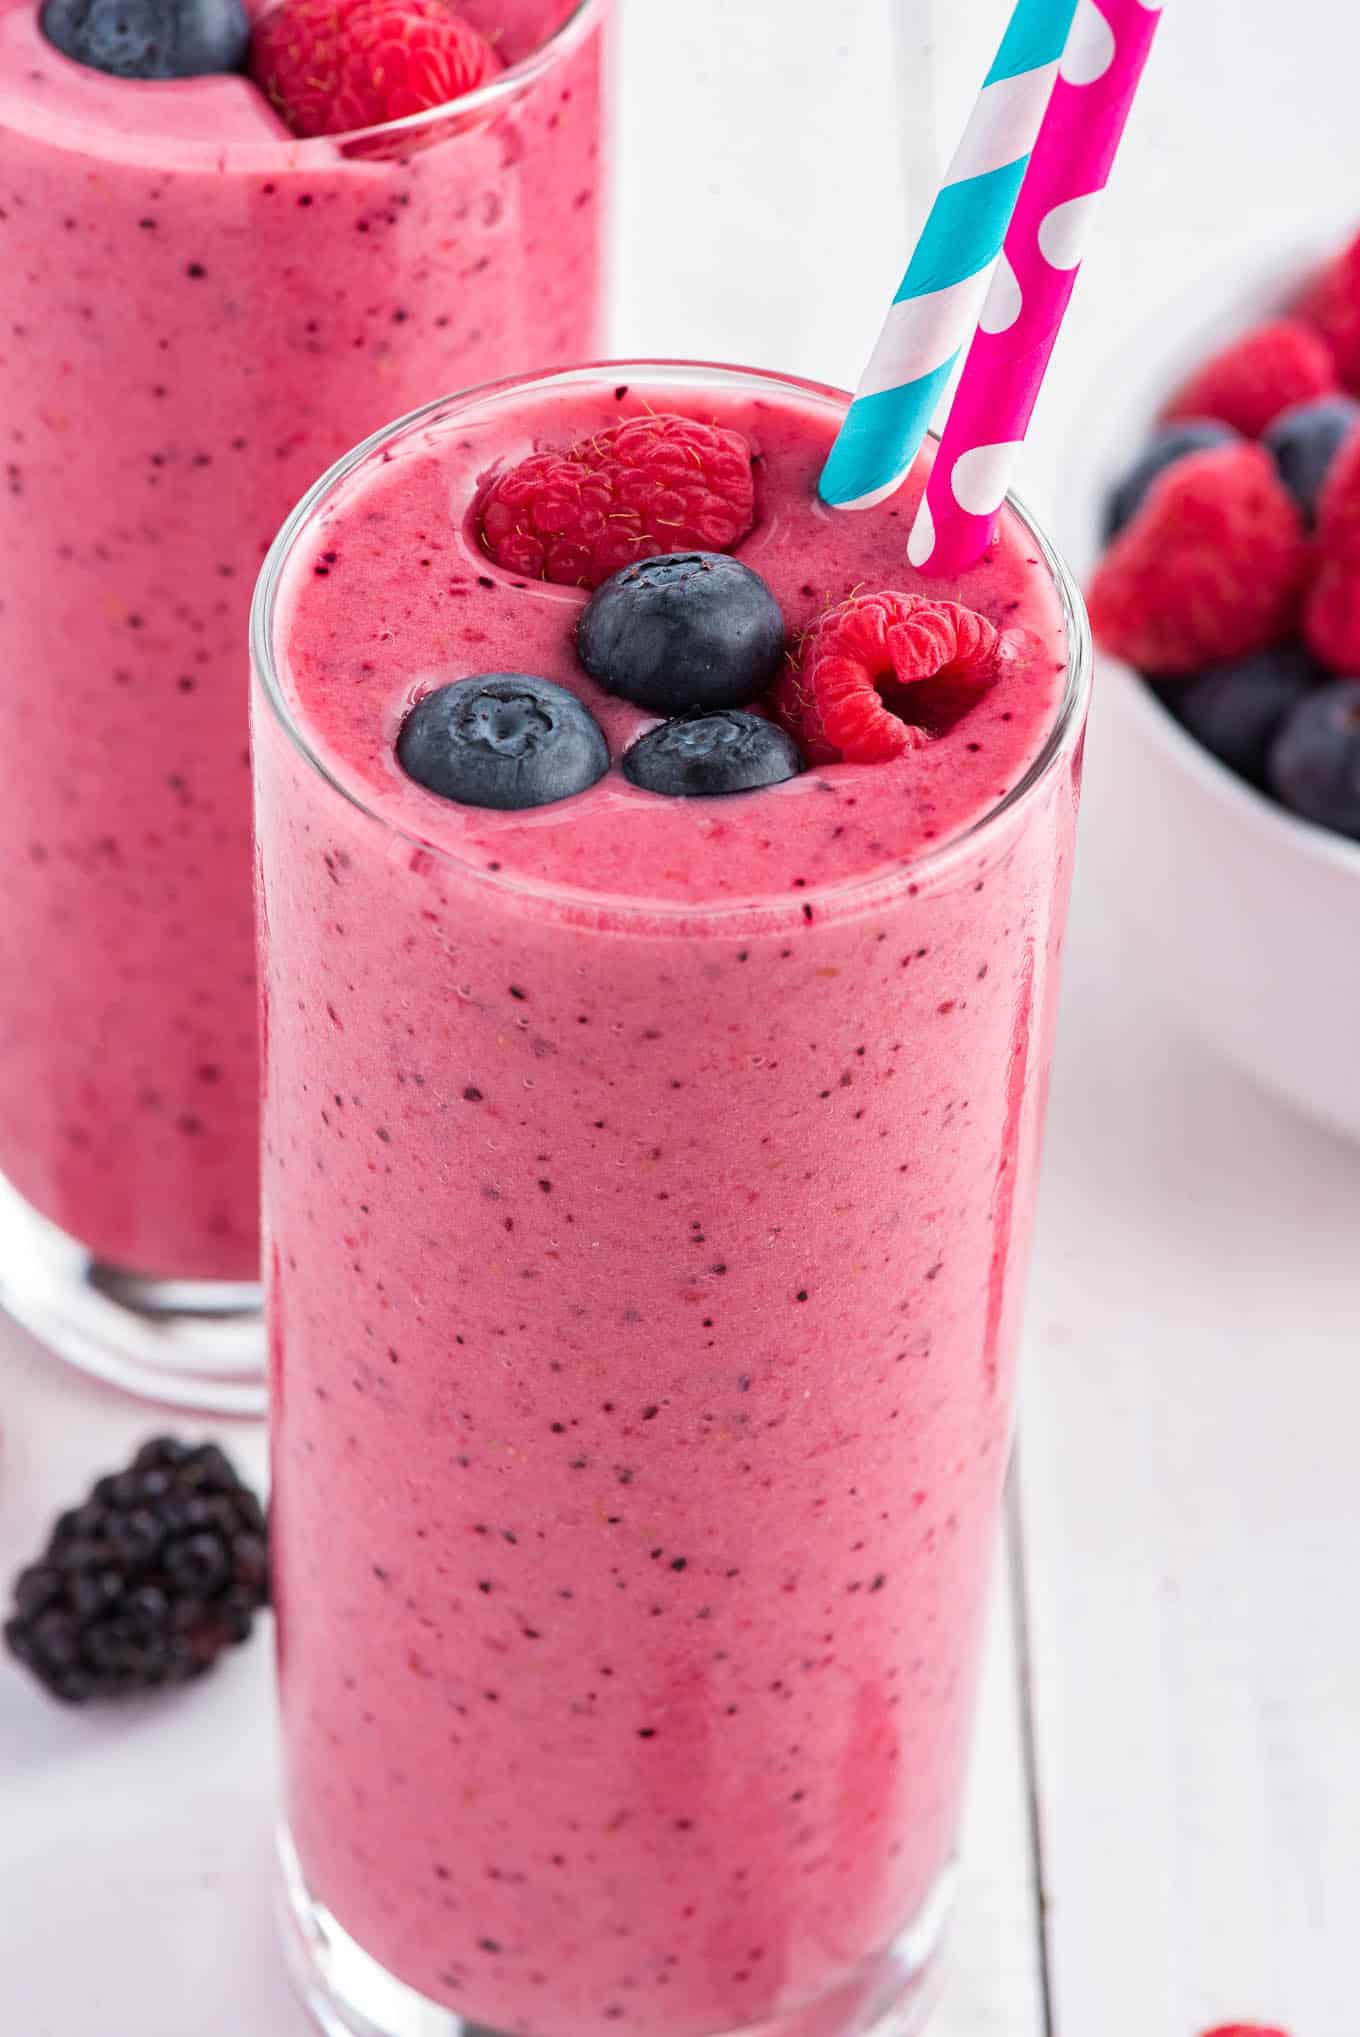 A glass of breakfast smoothie garnished with blueberries and raspberries on the table with another in the background and a bowl of berries.